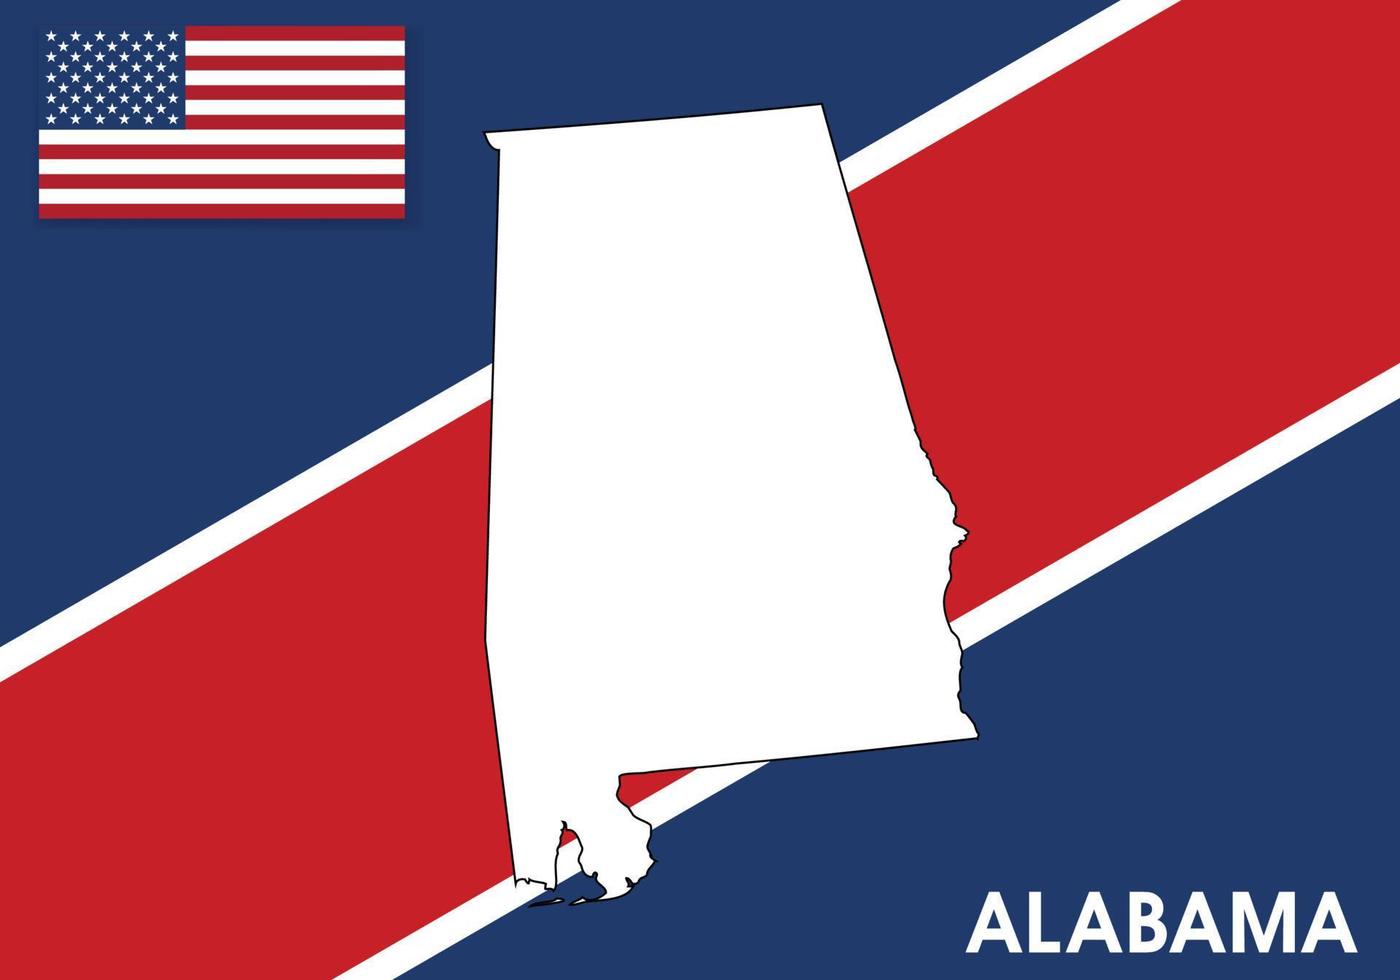 Alabama - USA, United States of America Map vector template.  white color map on flag background for design, infographic - Vector illustration eps 10